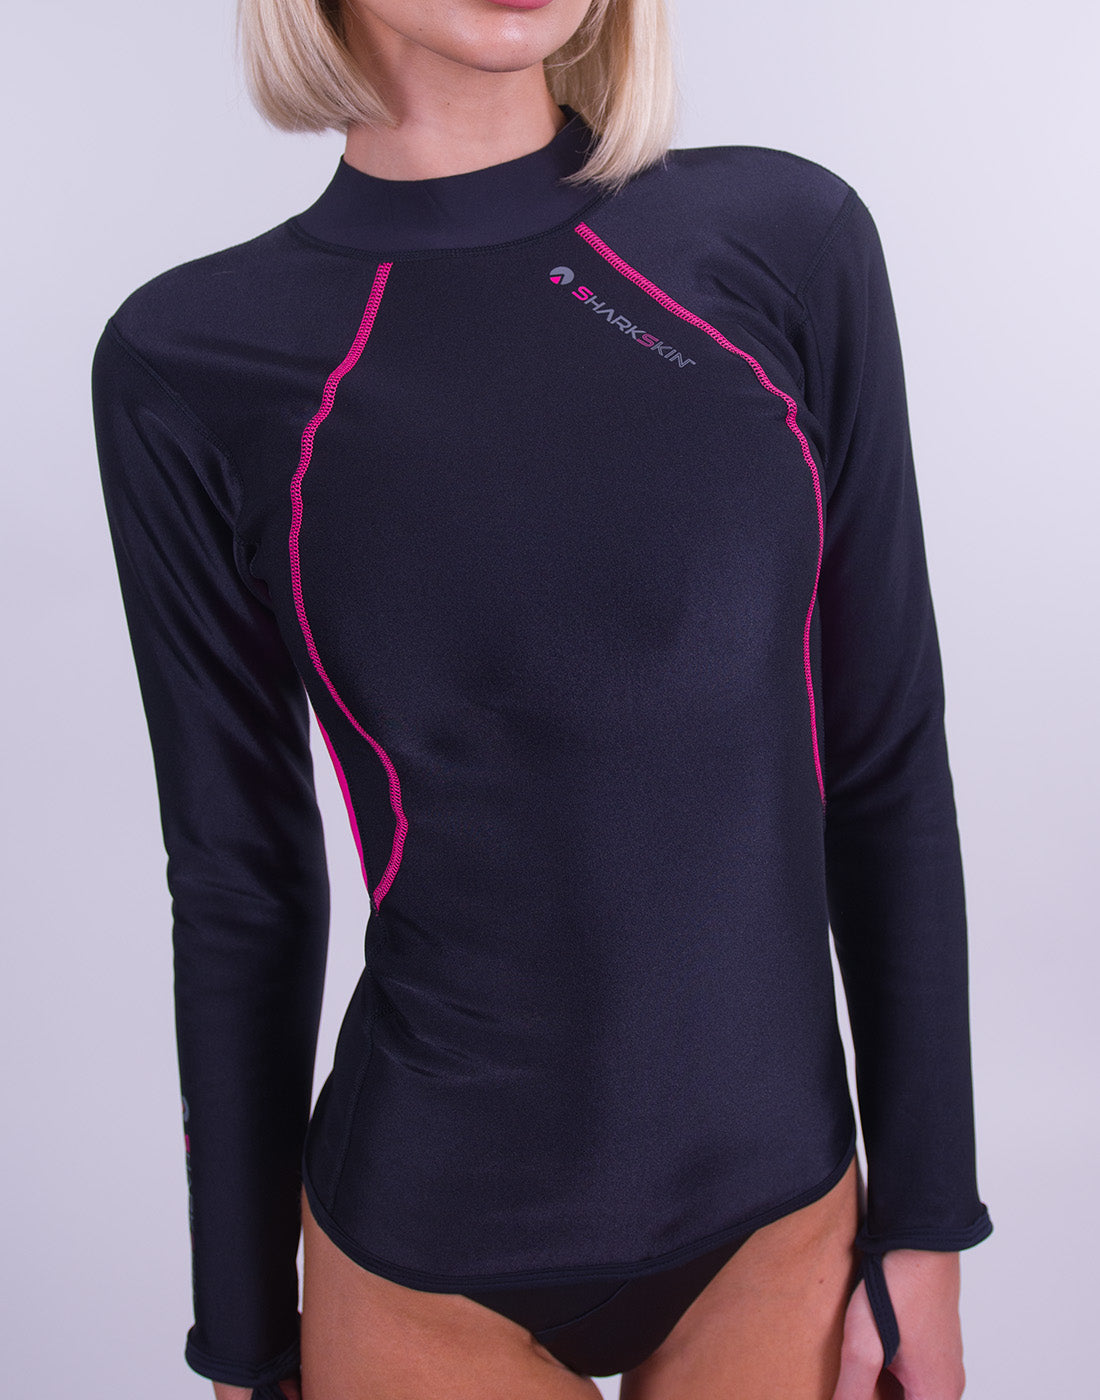 CHILLPROOF LONG SLEEVE TOP - WOMENS